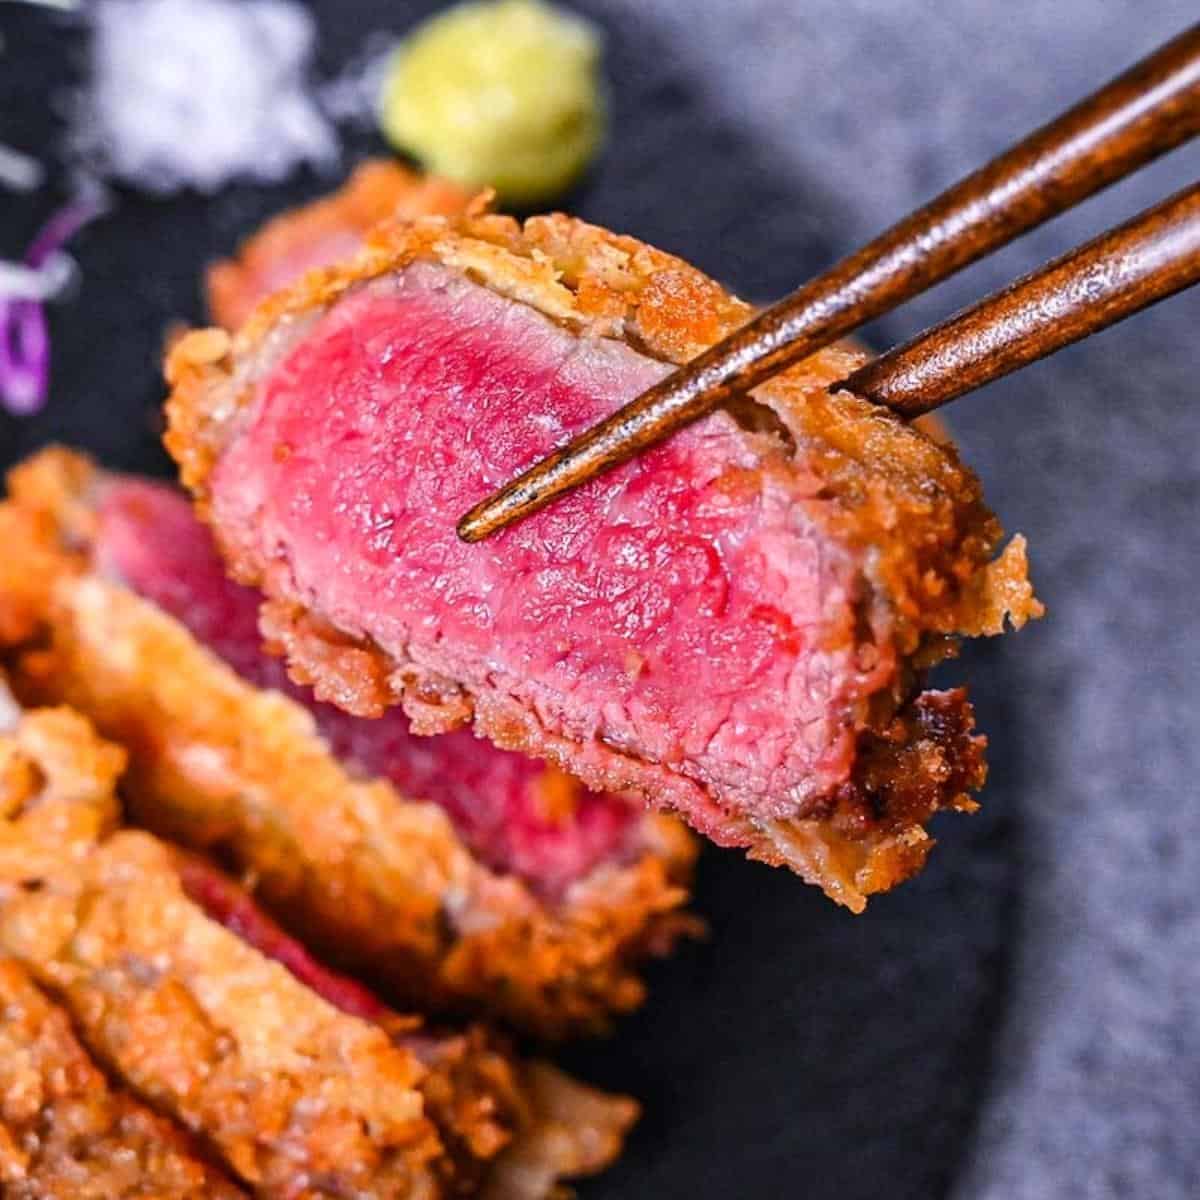 Gyukatsu (Japanese beef steak cutlet) served with cabbage, salt flakes and wasabi on a black slate plate